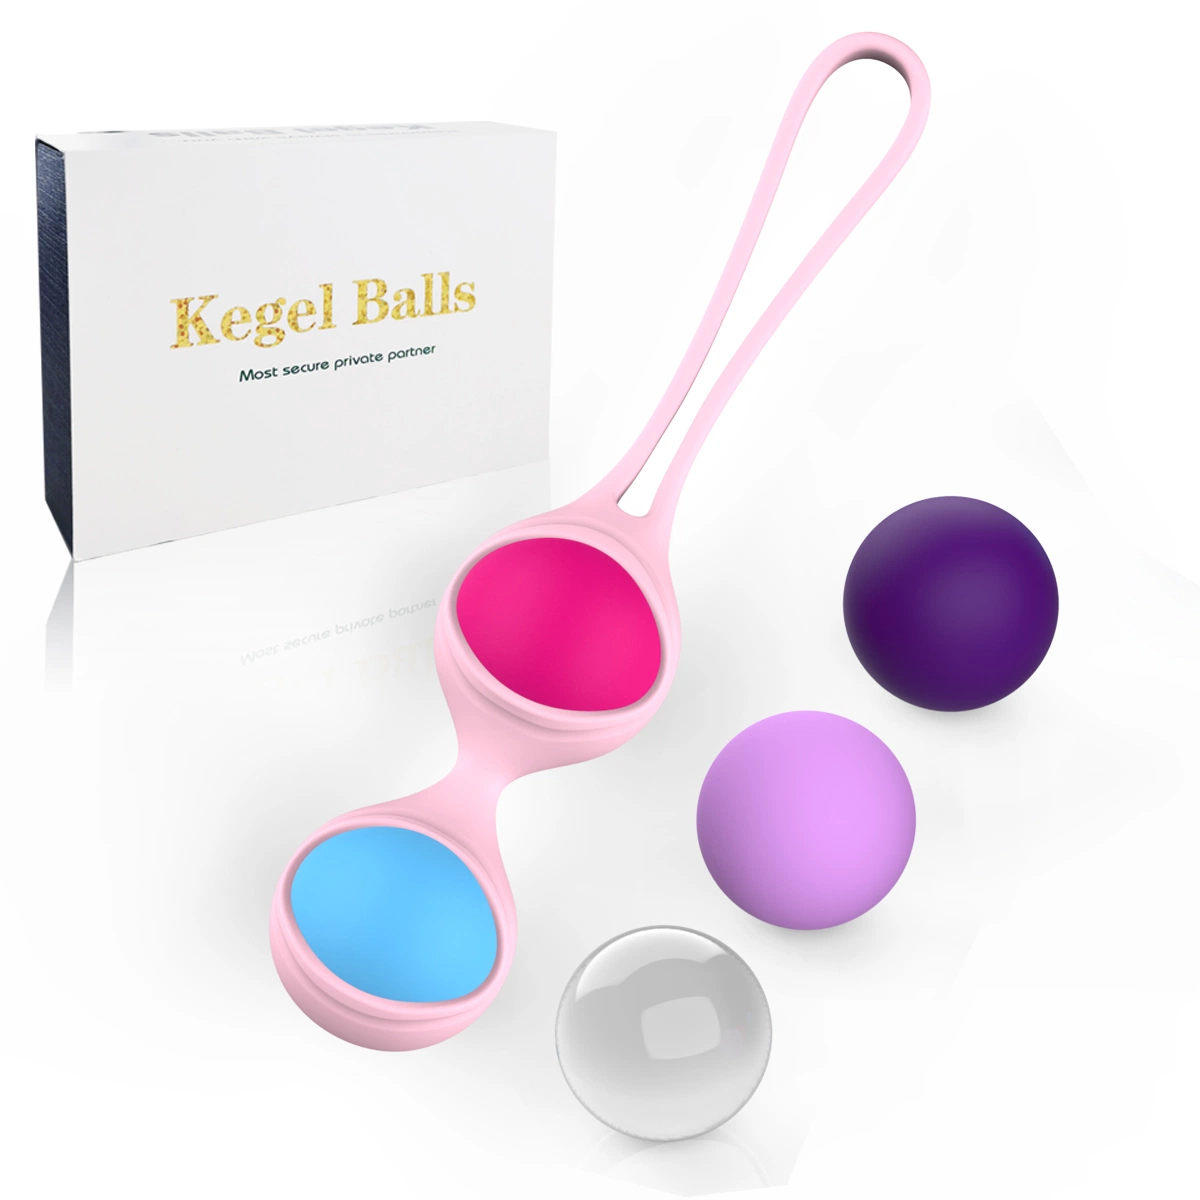 Doctor Recommended Daily Use Kegel Exercise Balls